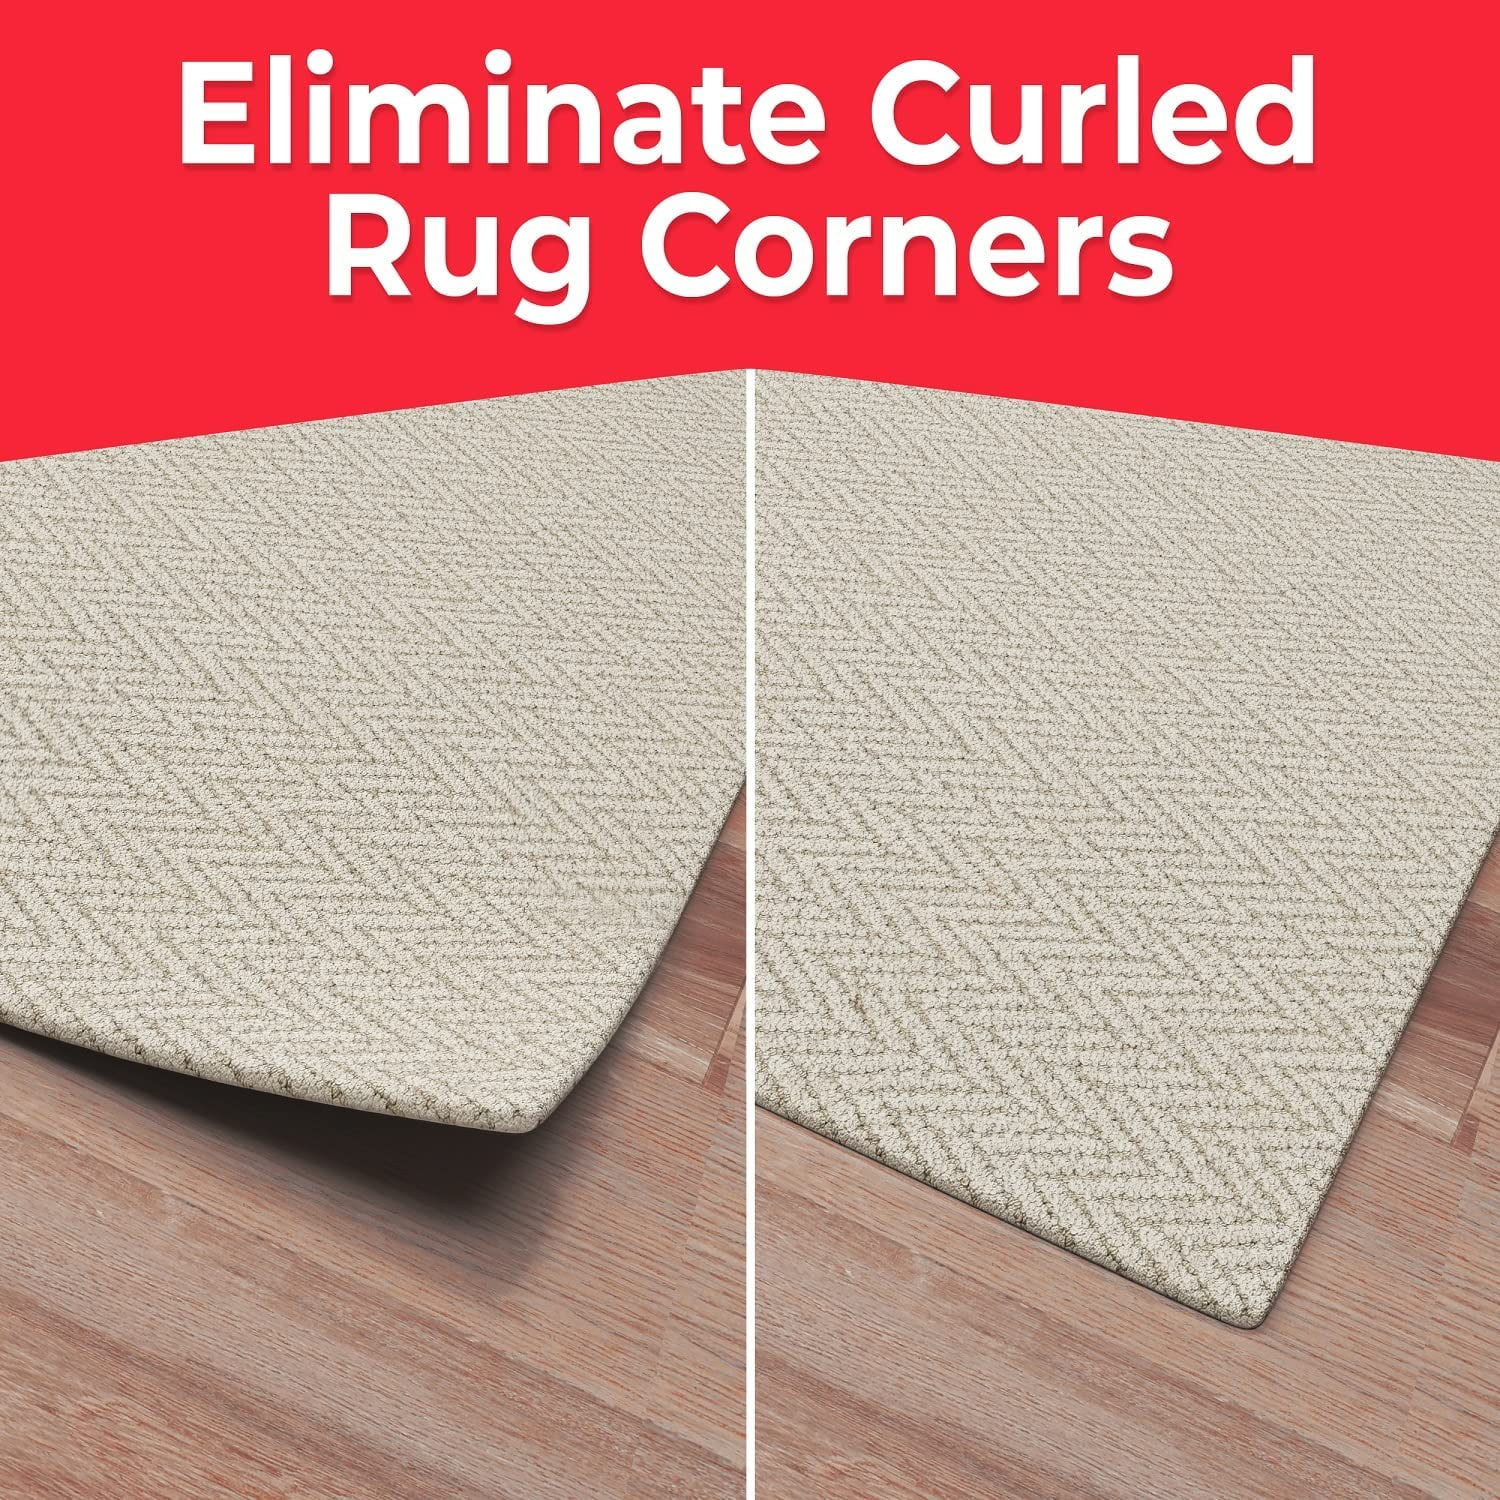 Curl Stop Anti-Curling Rug System (Pack of 4 Corners)